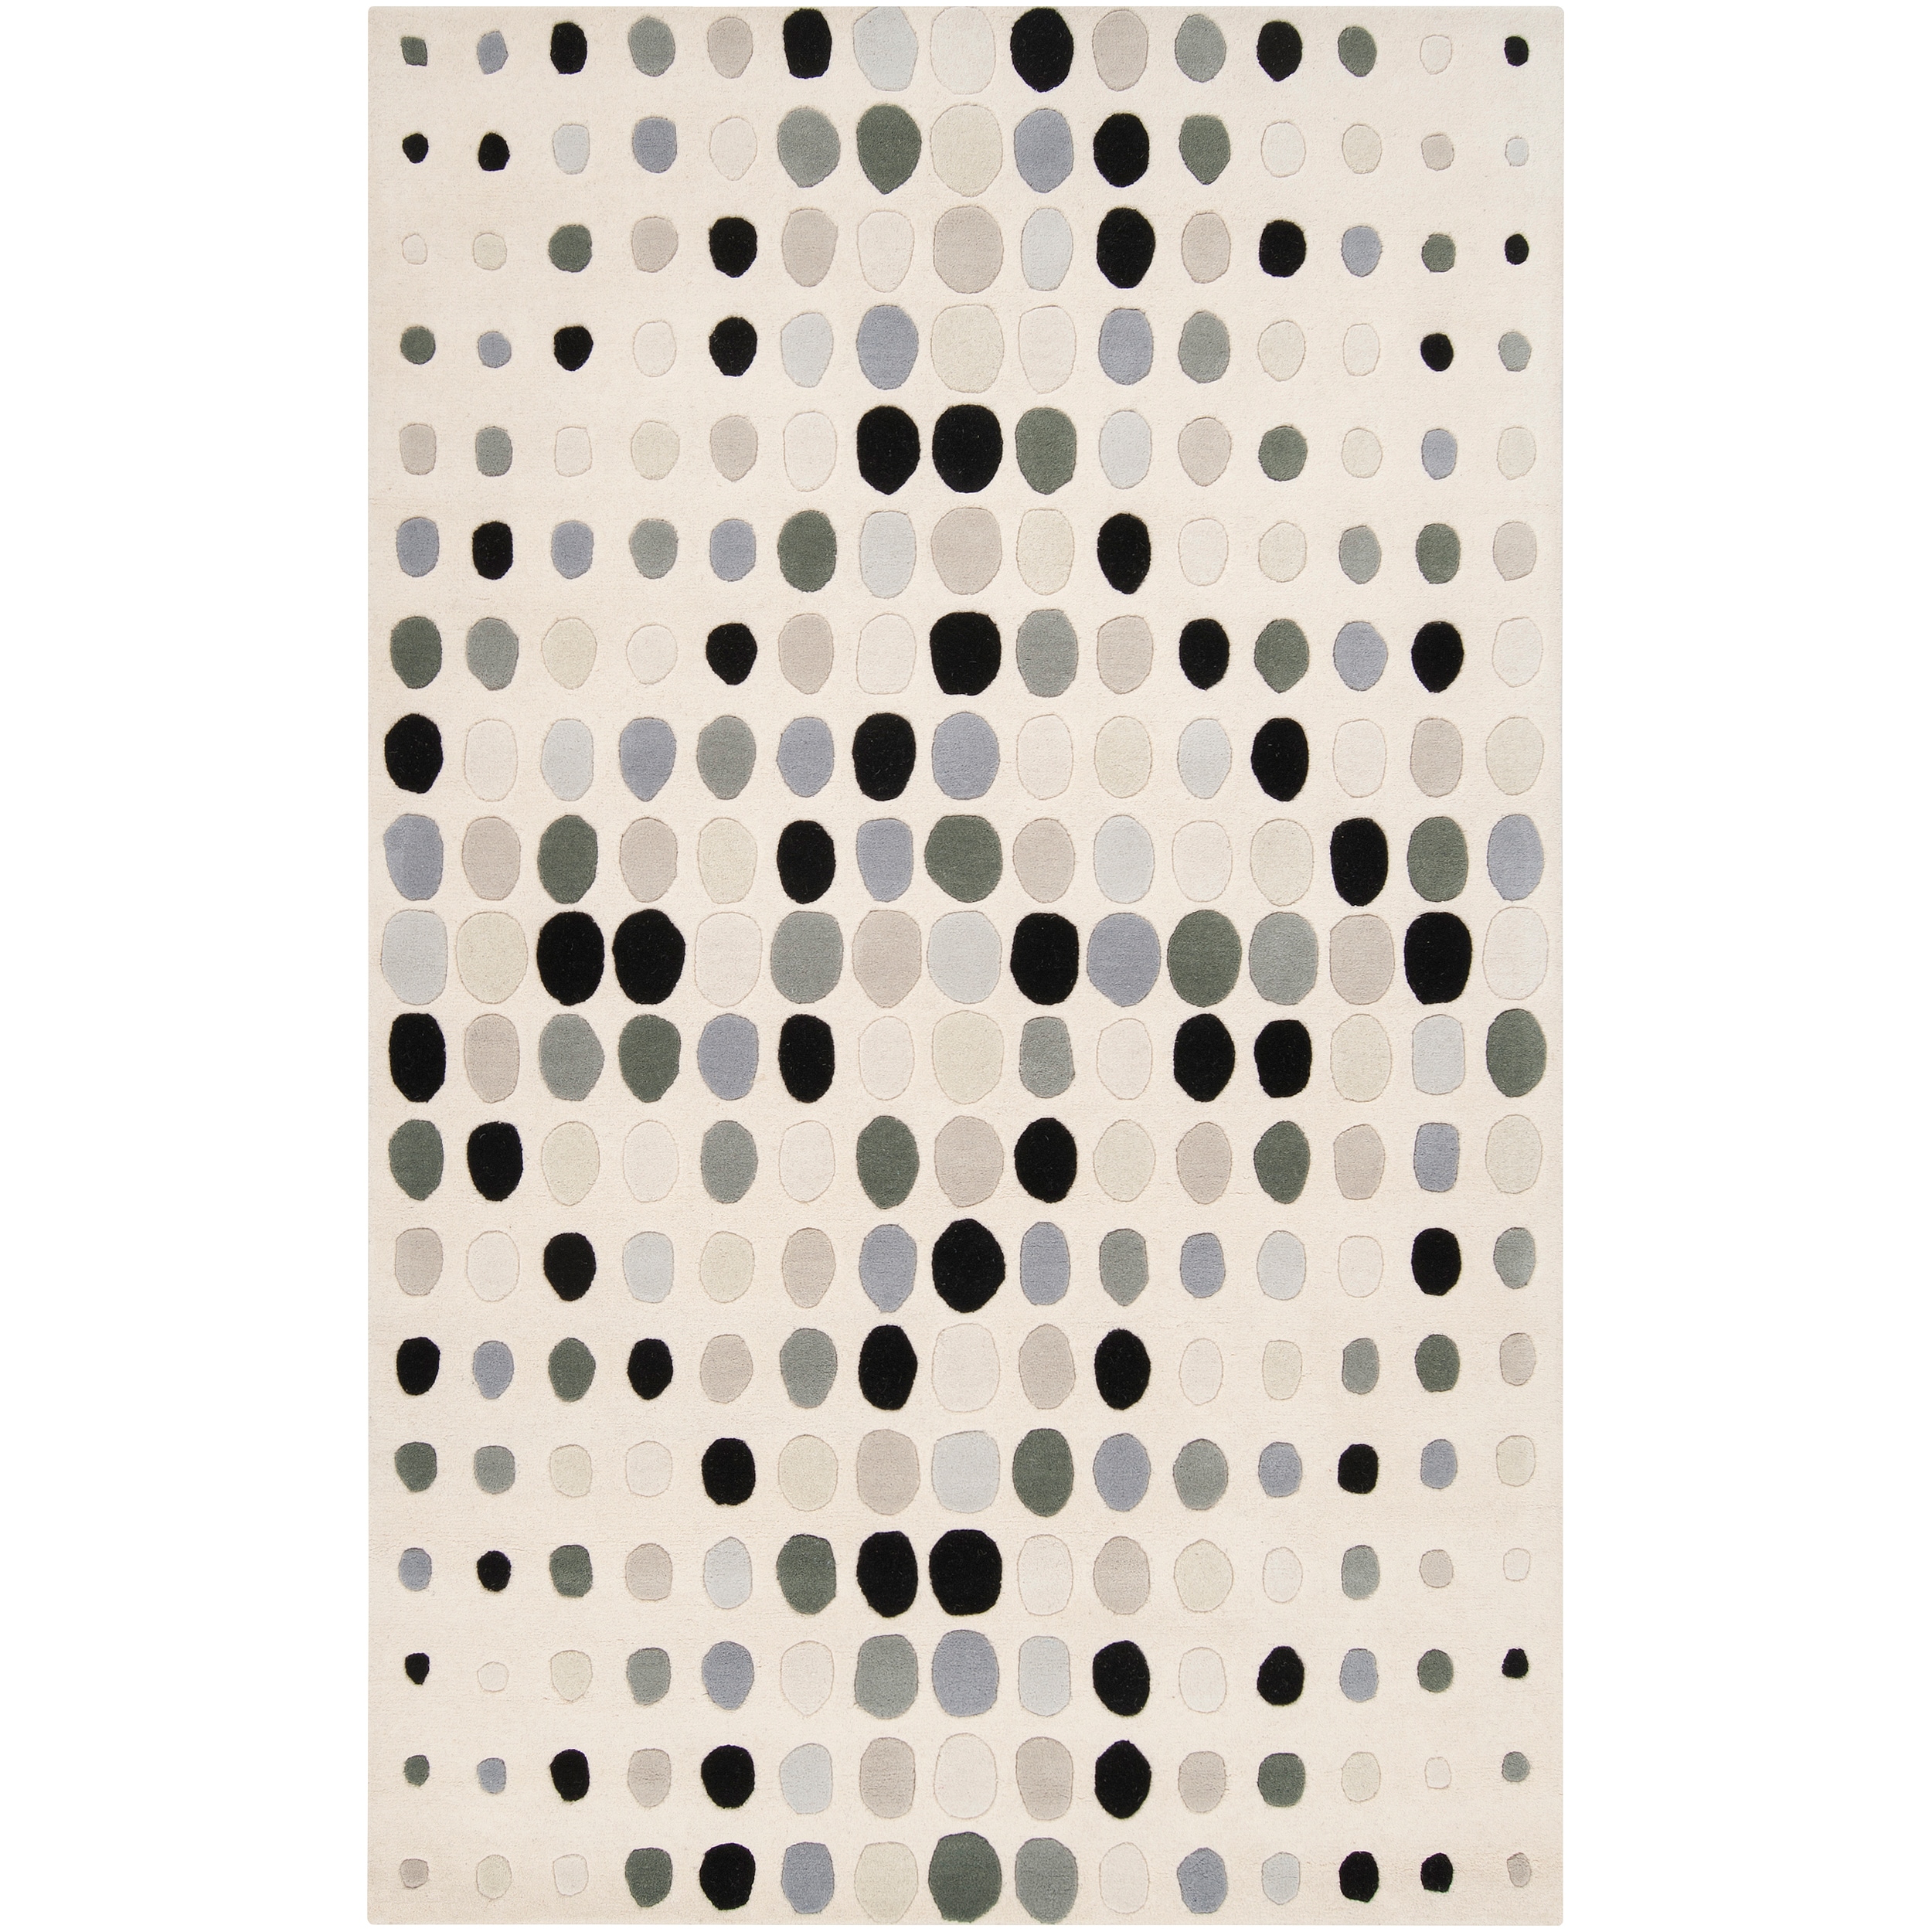 Tepper Jackson Hand tufted Contemporary Multi Colored Circles Comet Geometric Wool Rug (5 X 8)